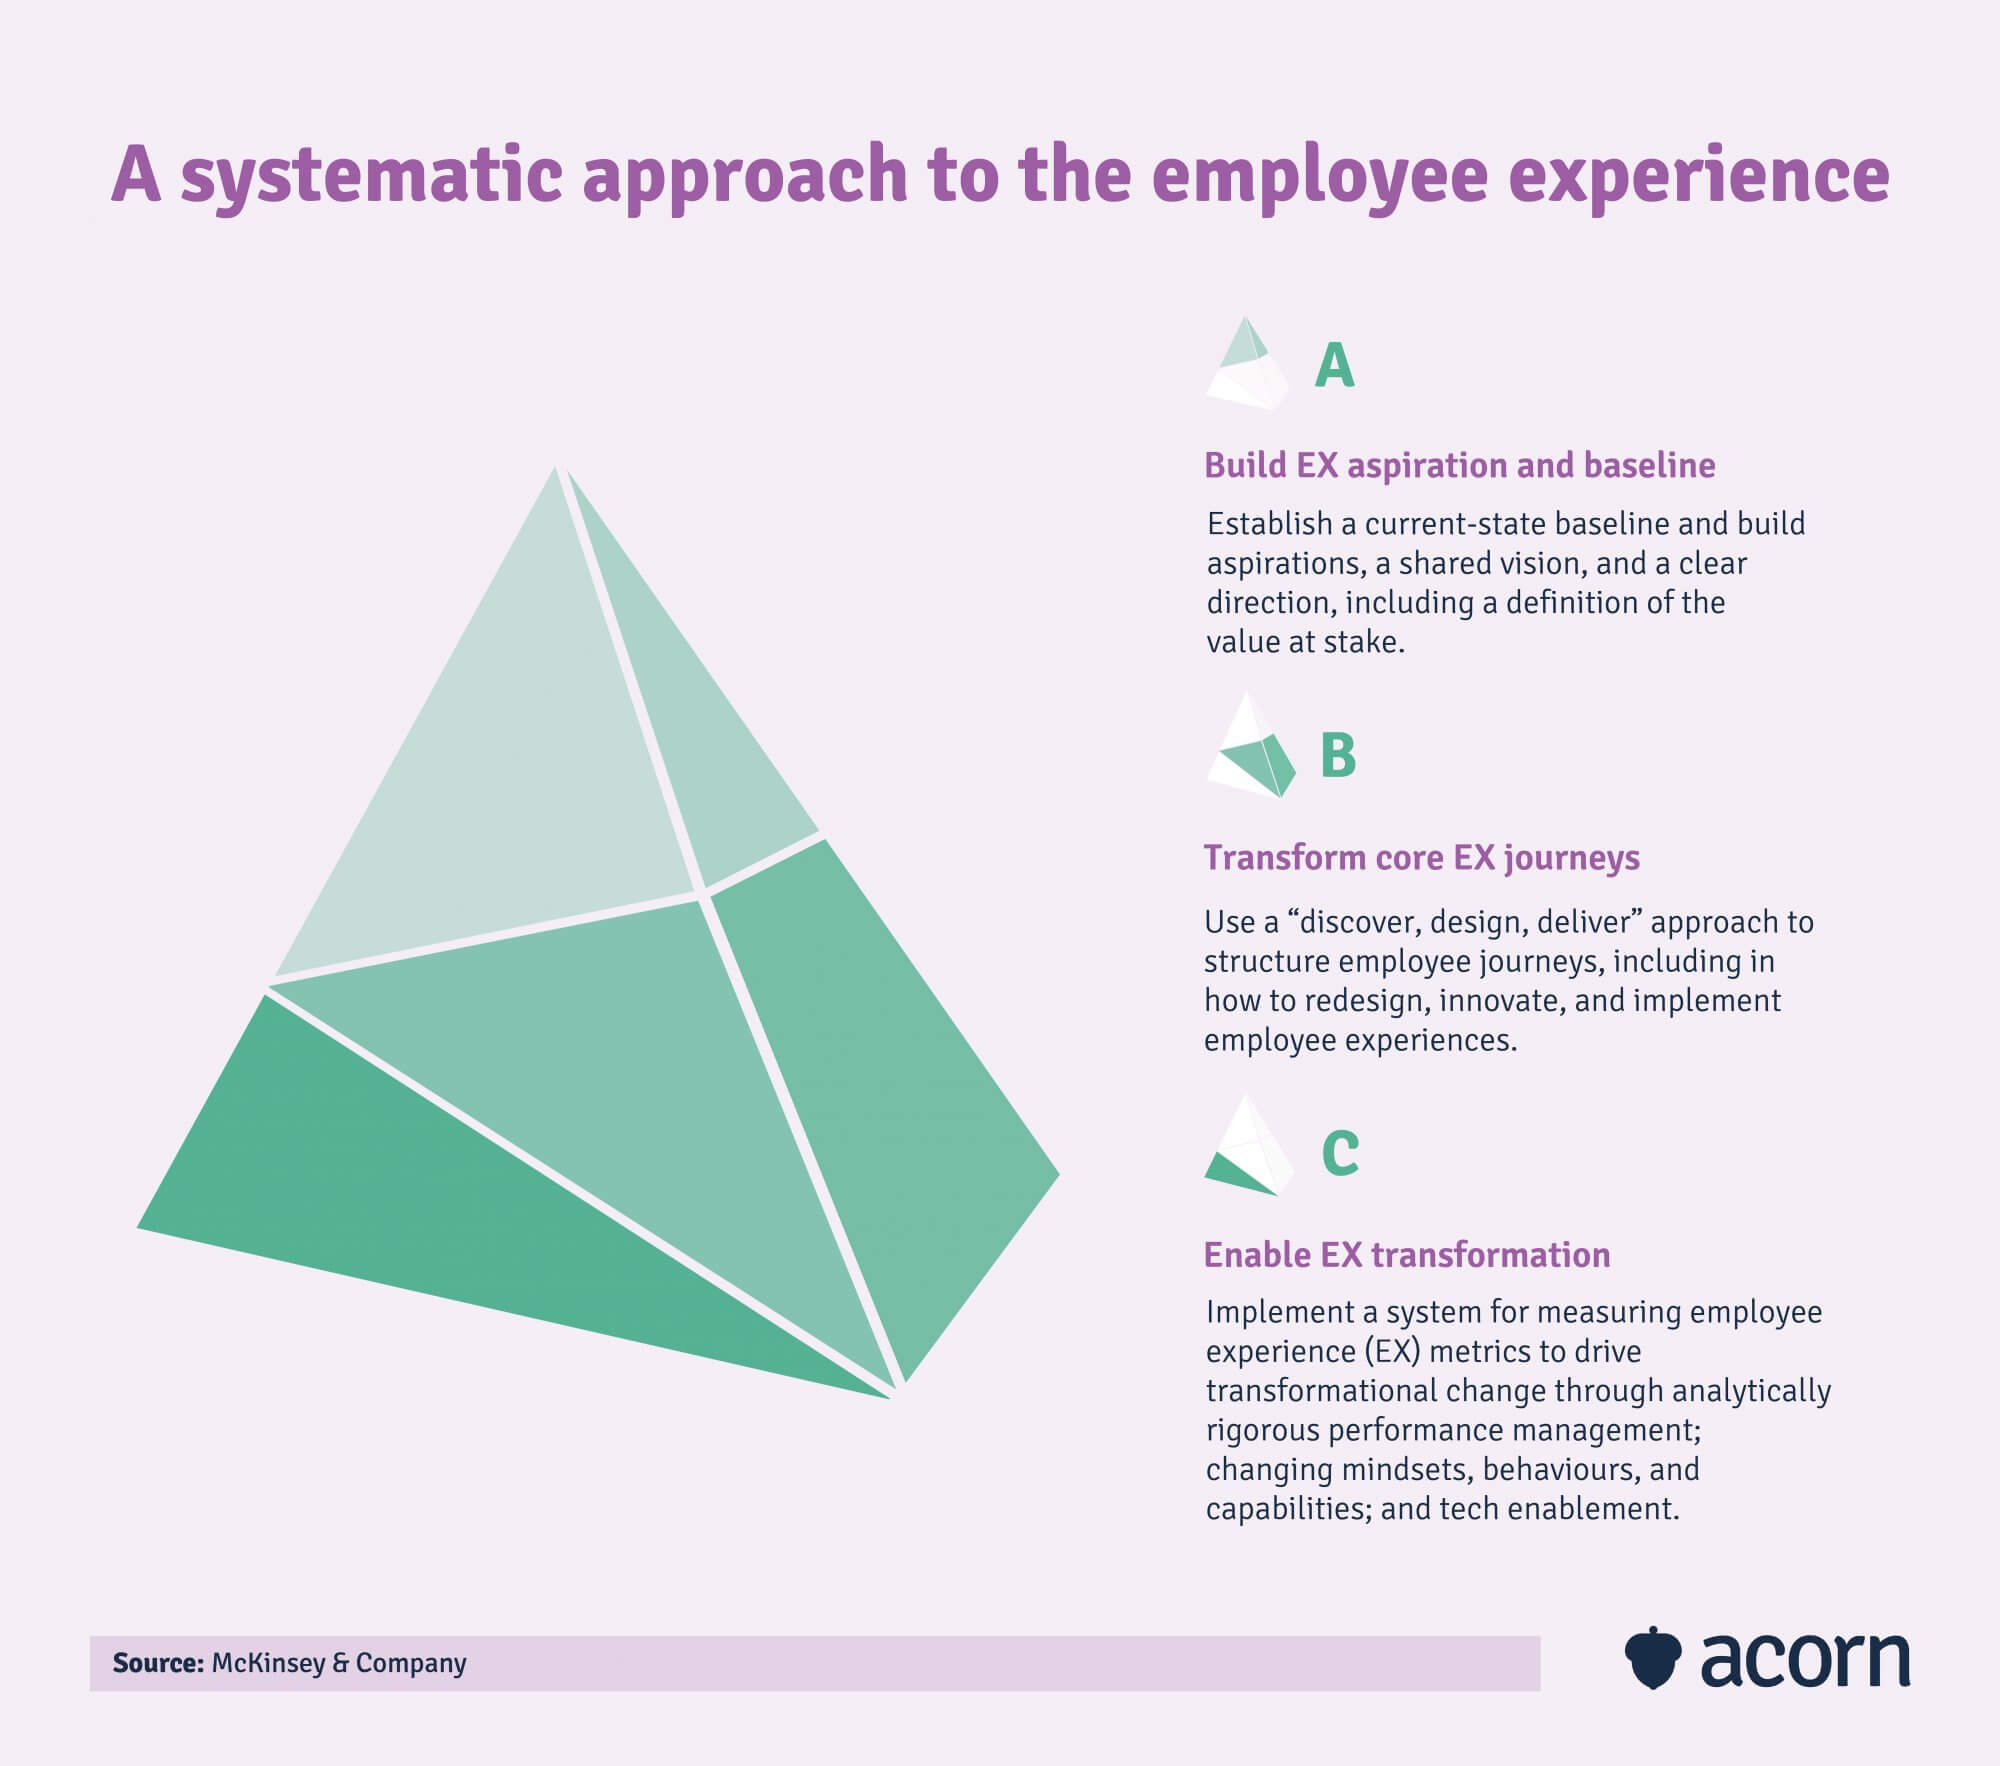 McKinsey's 3-stage approach to building business value in the employee experience